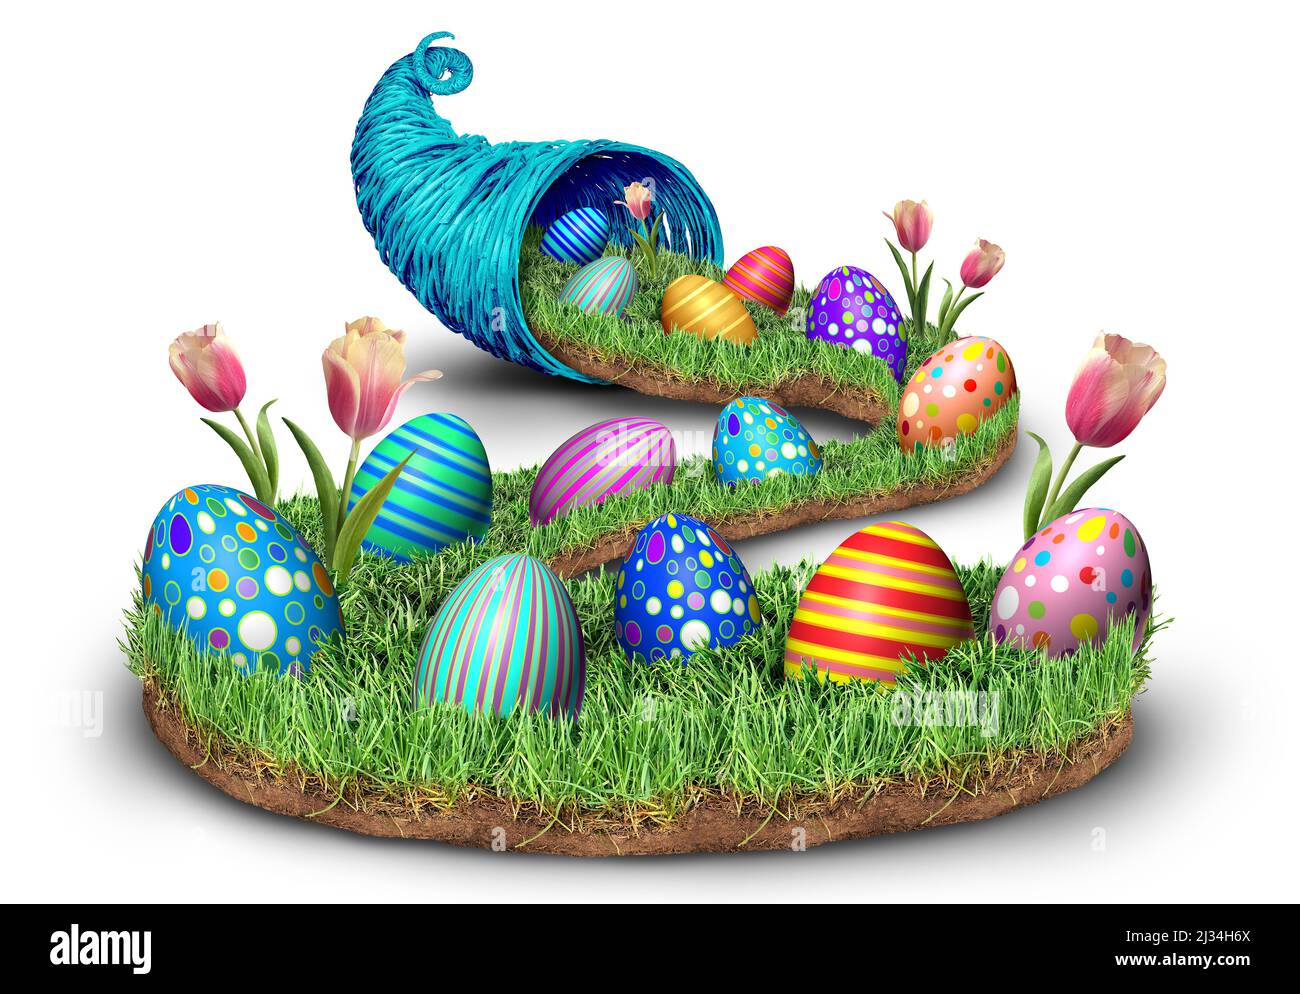 Spring Easter Cornucopia horn object full of decorated eggs on green grass on a white background. Stock Photo